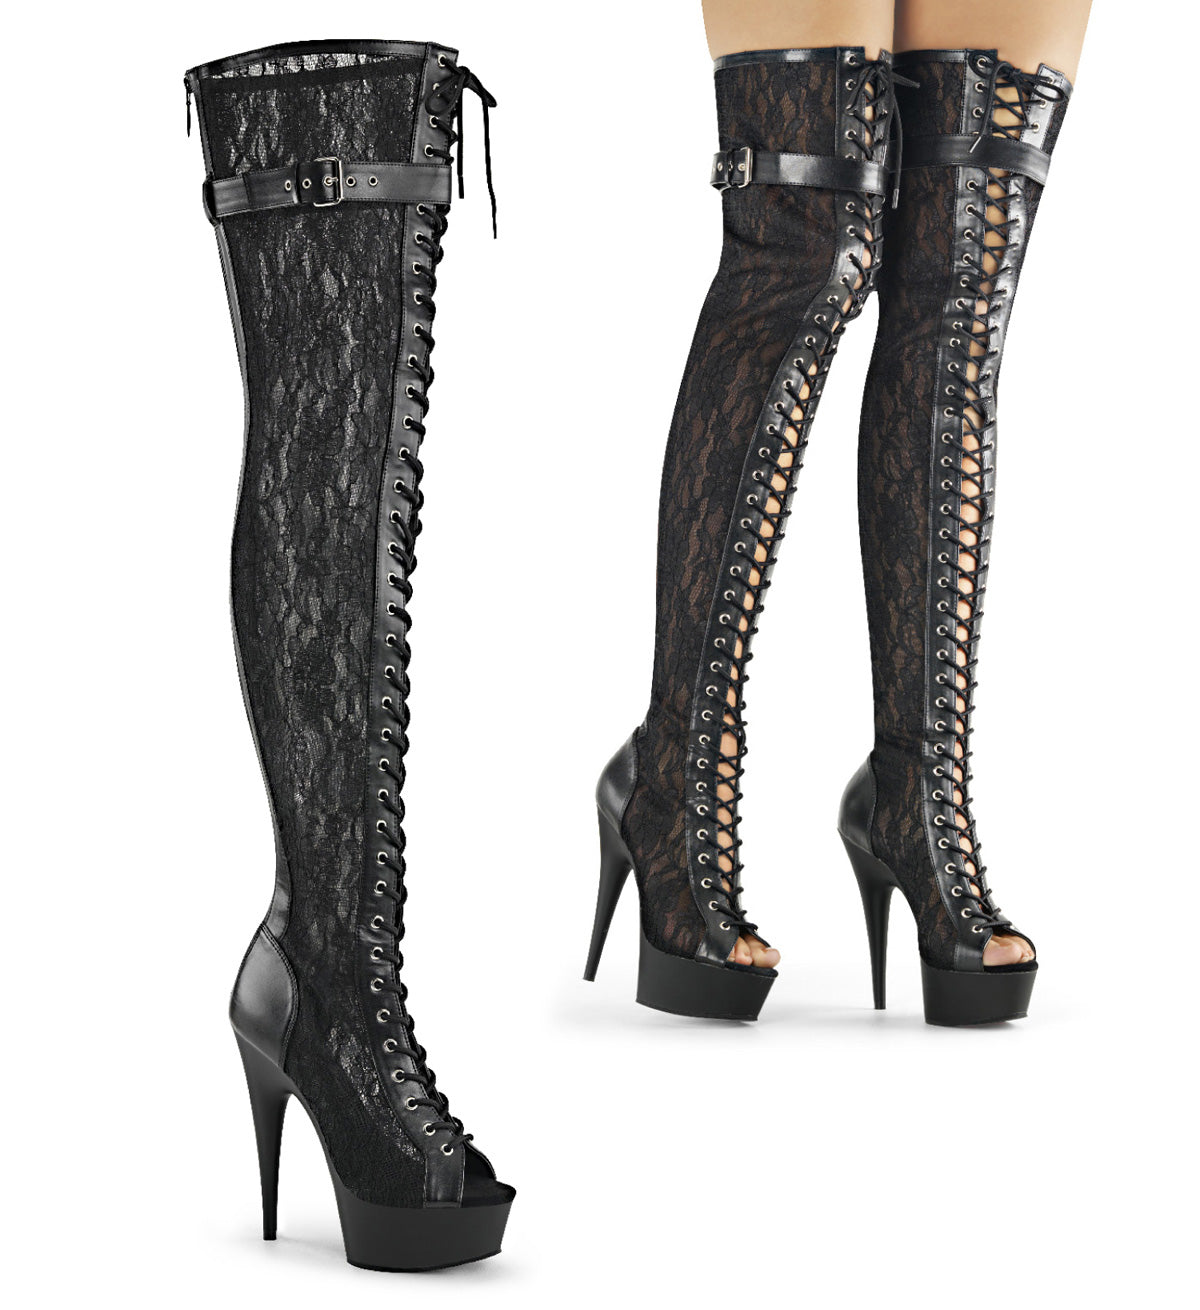 DELIGHT-3025ML Black Thigh High Boots